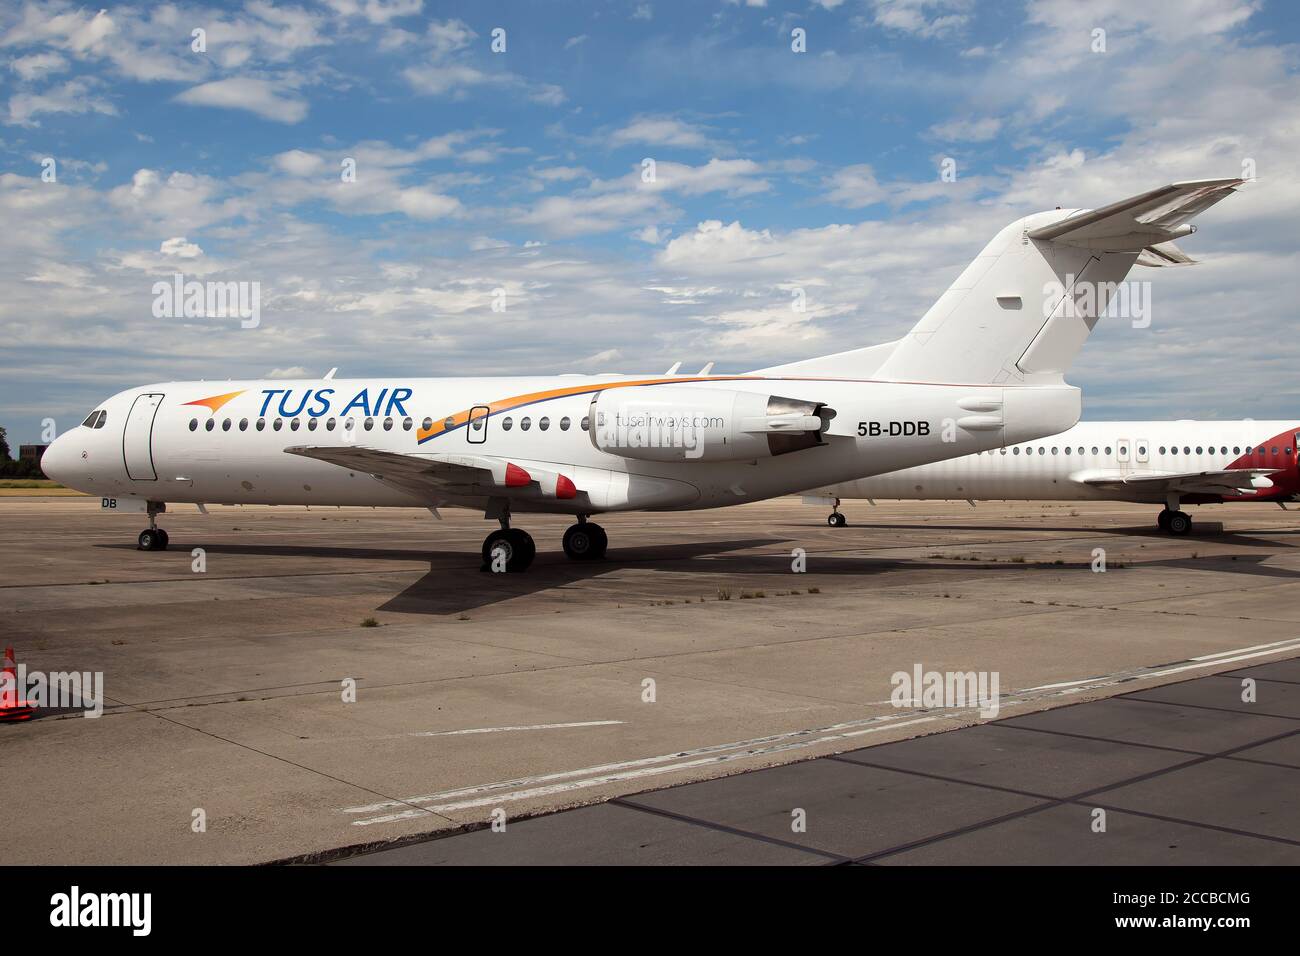 A Tus Airways Fokker 70  stored at  Maastricht-Aachen Airport. Stock Photo